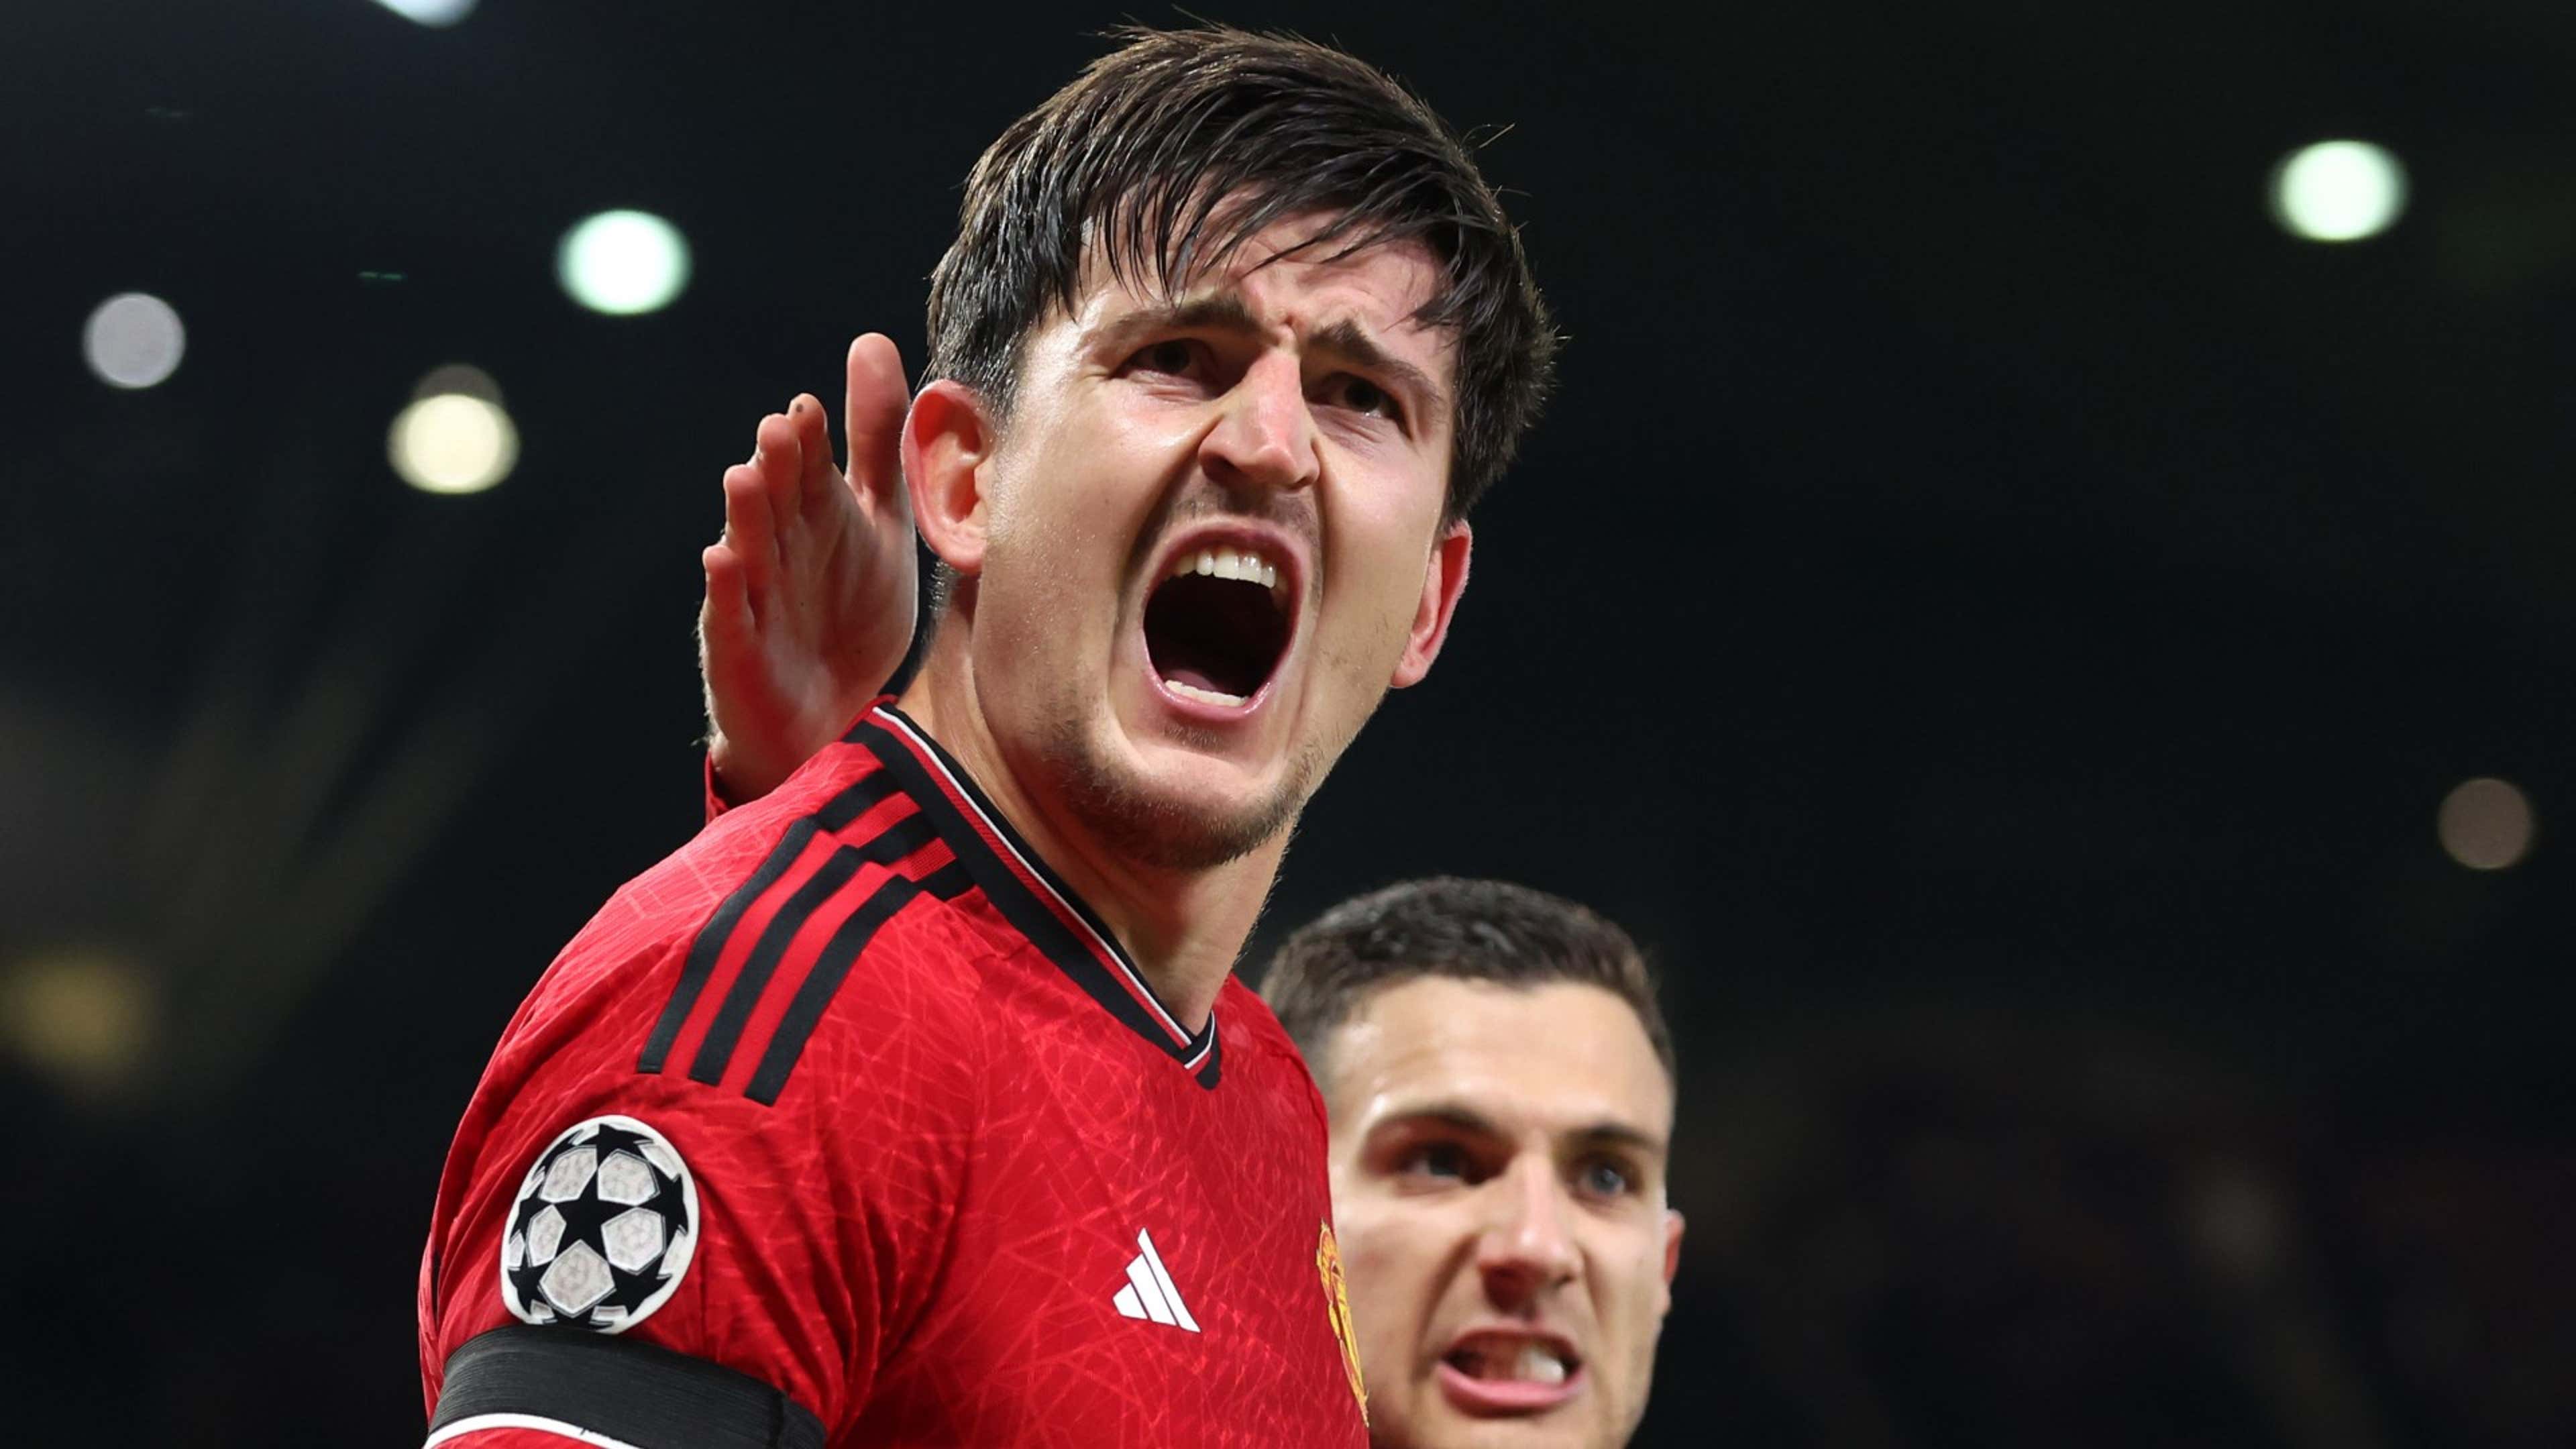 Harry Maguire has been named the Premier League Player of the